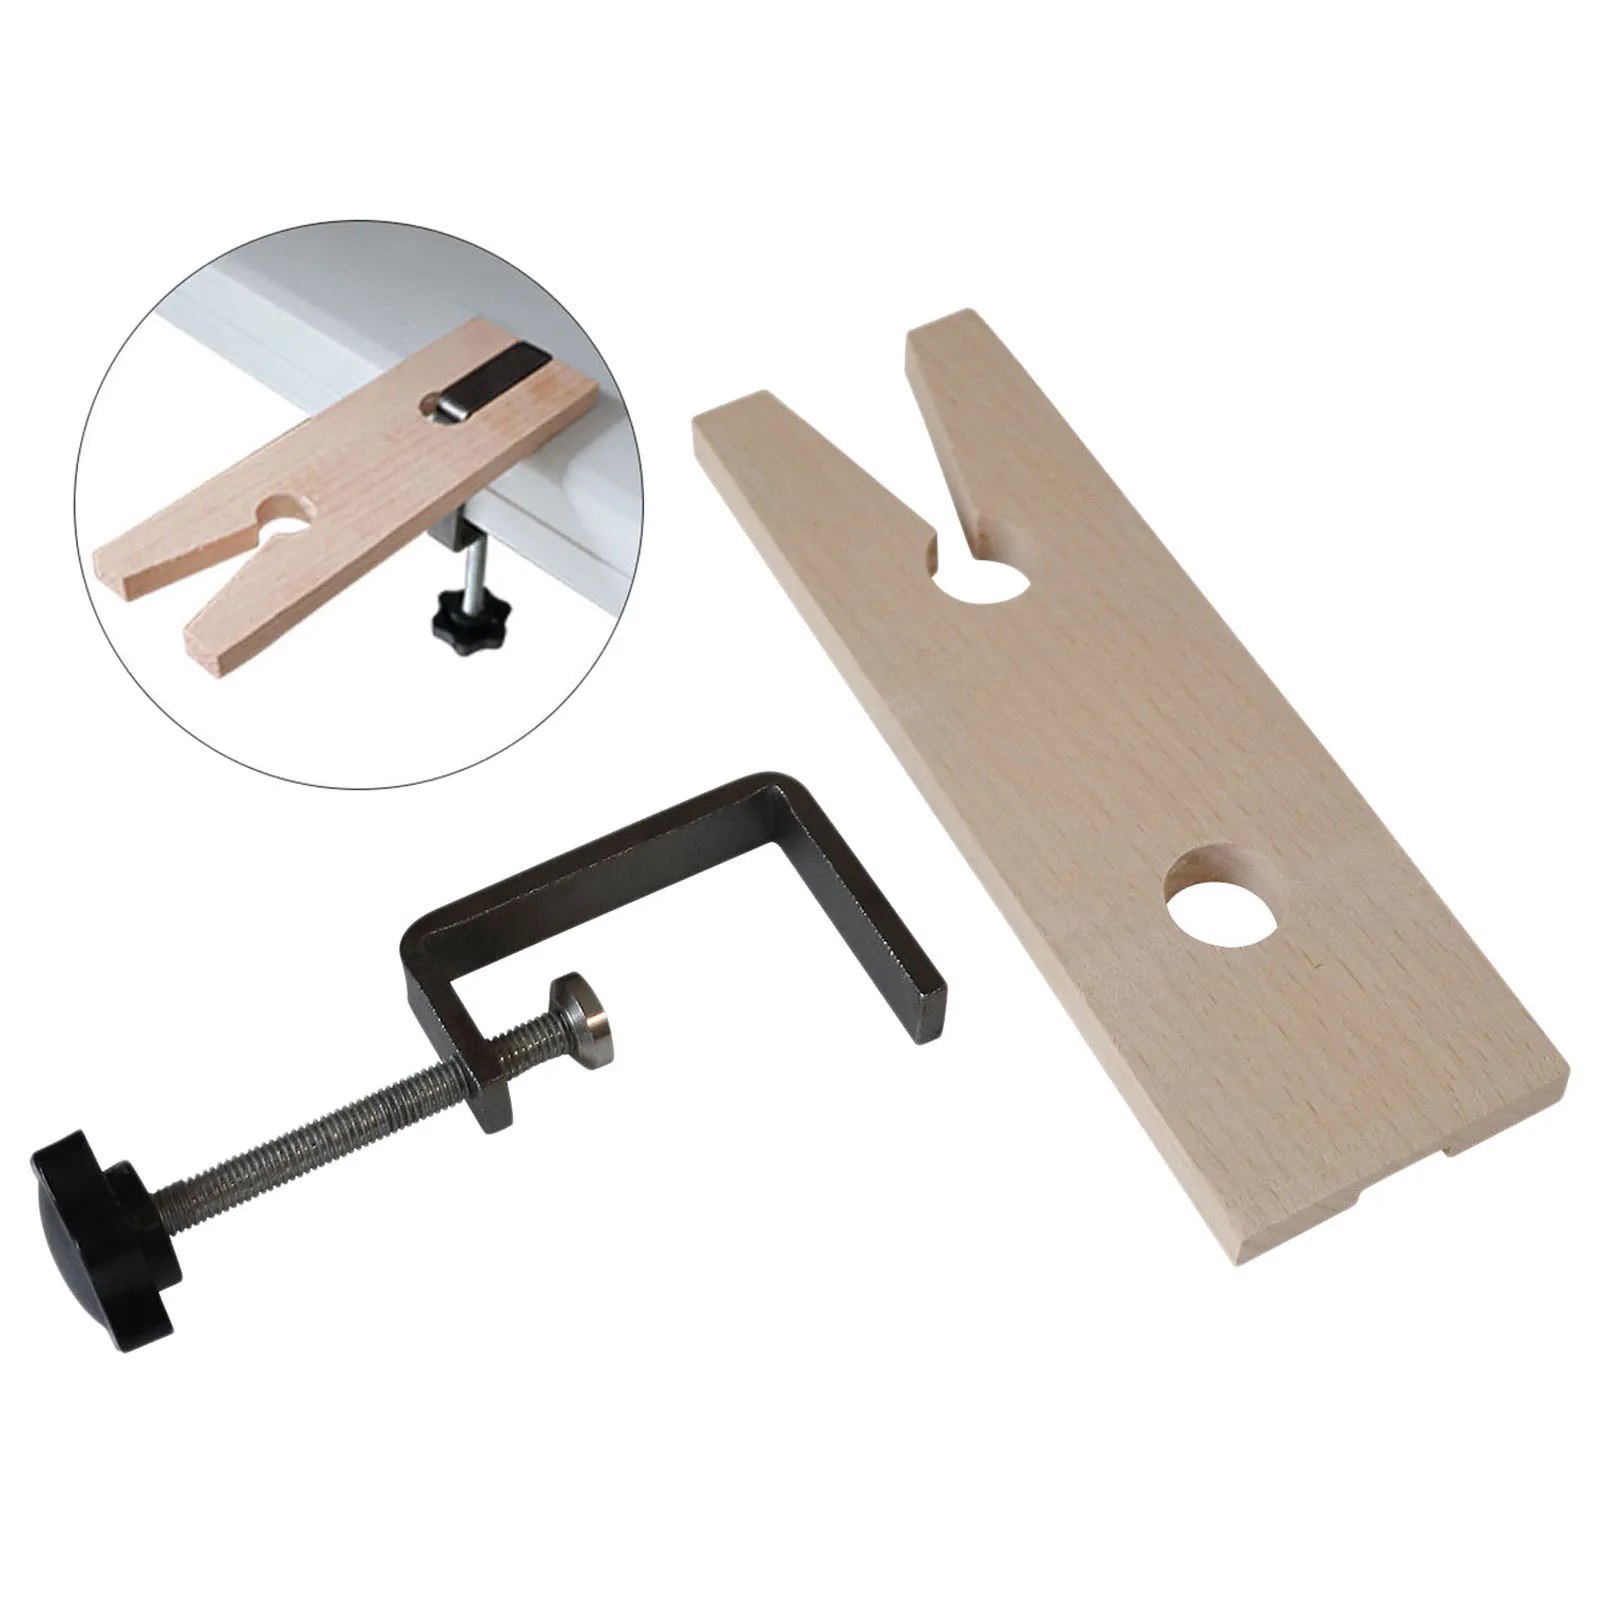 Bench Pin Clamp Hardwood Jewellers Watch Repair Jewelry Making V Slot Clip Tool Sawing Filing Finishing Holder